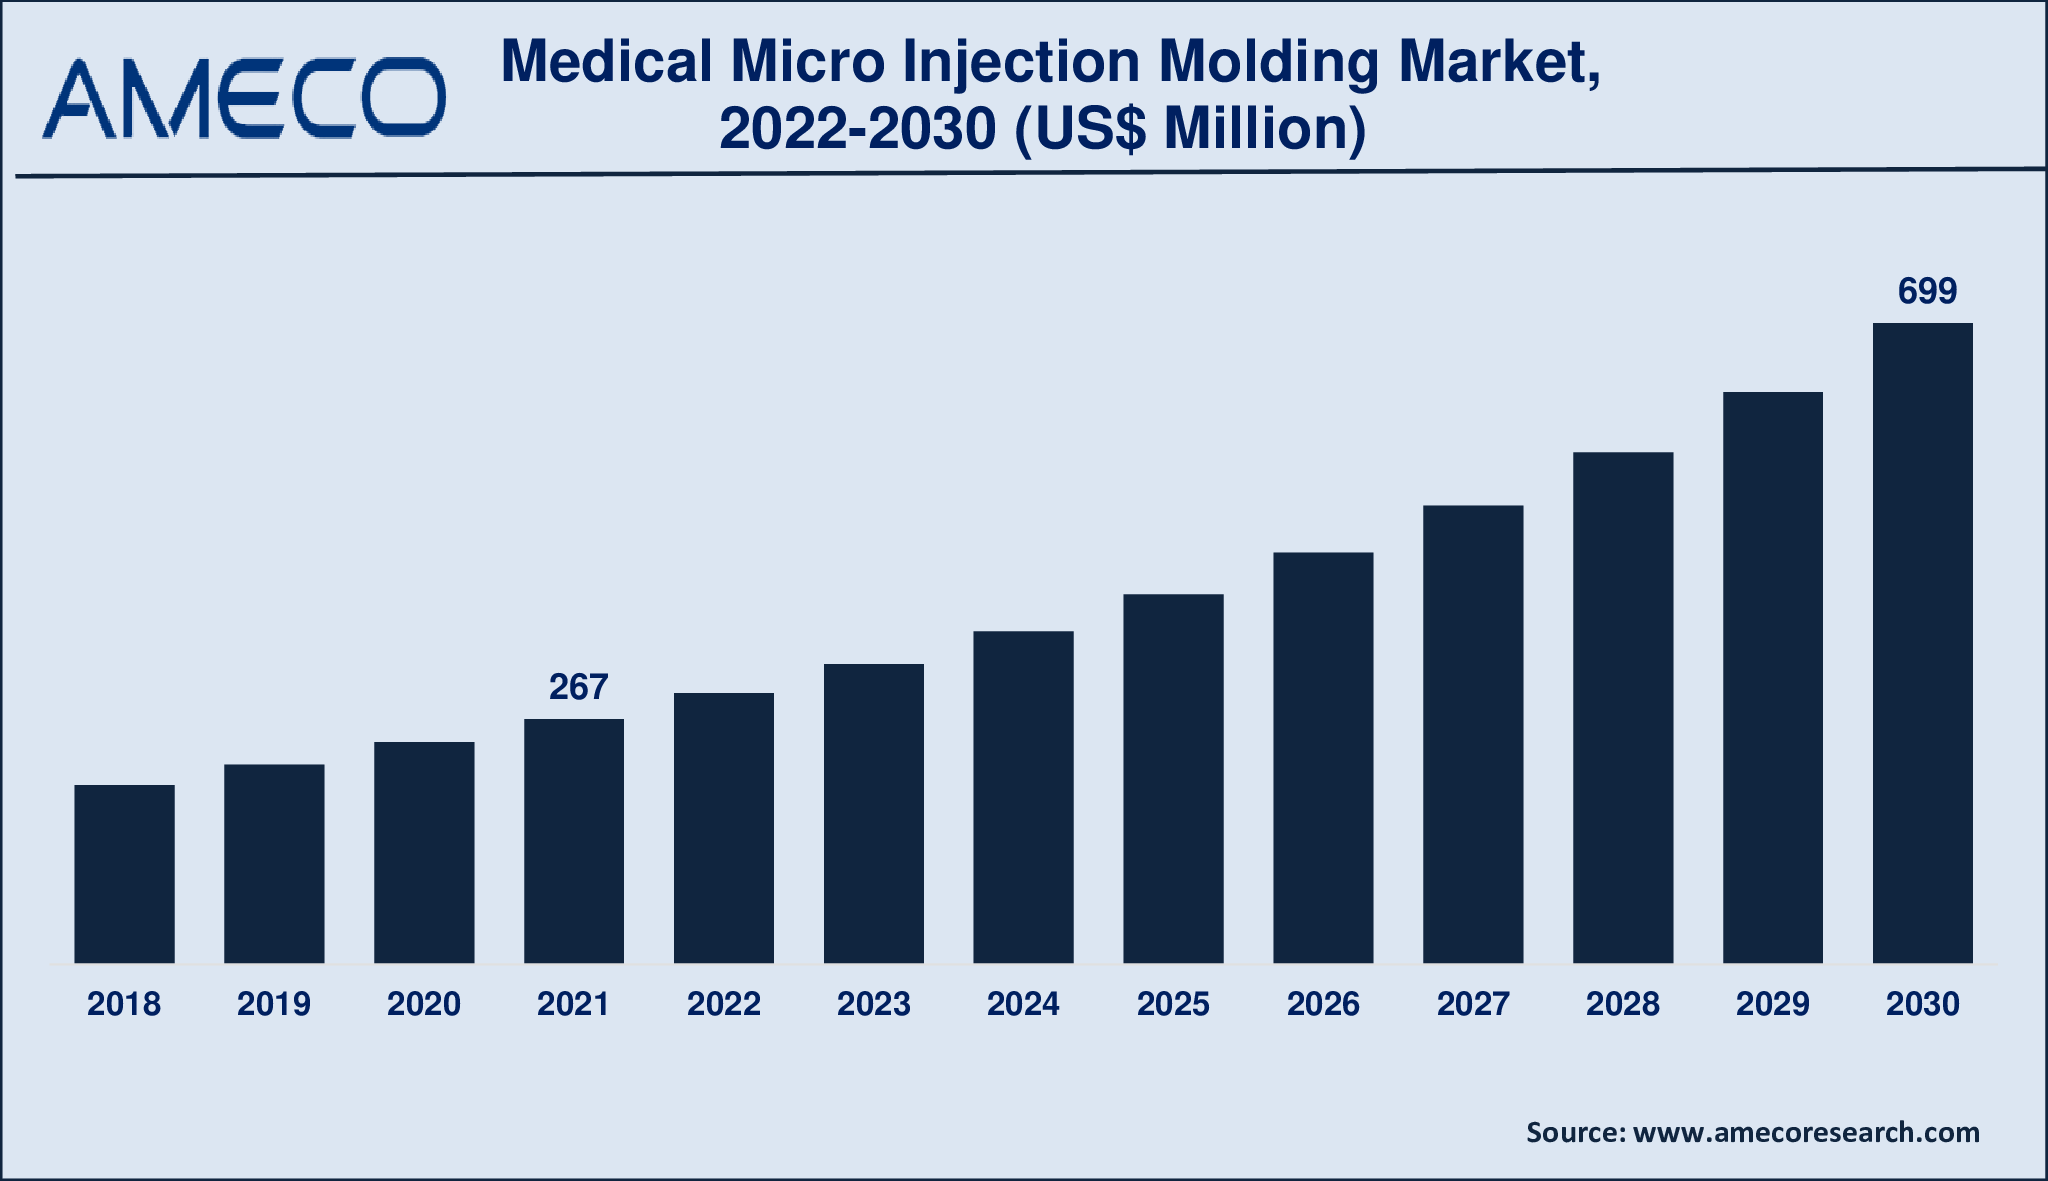 Medical Micro Injection Molding Market Size, Share, Growth, Trends, and Forecast 2022-2030